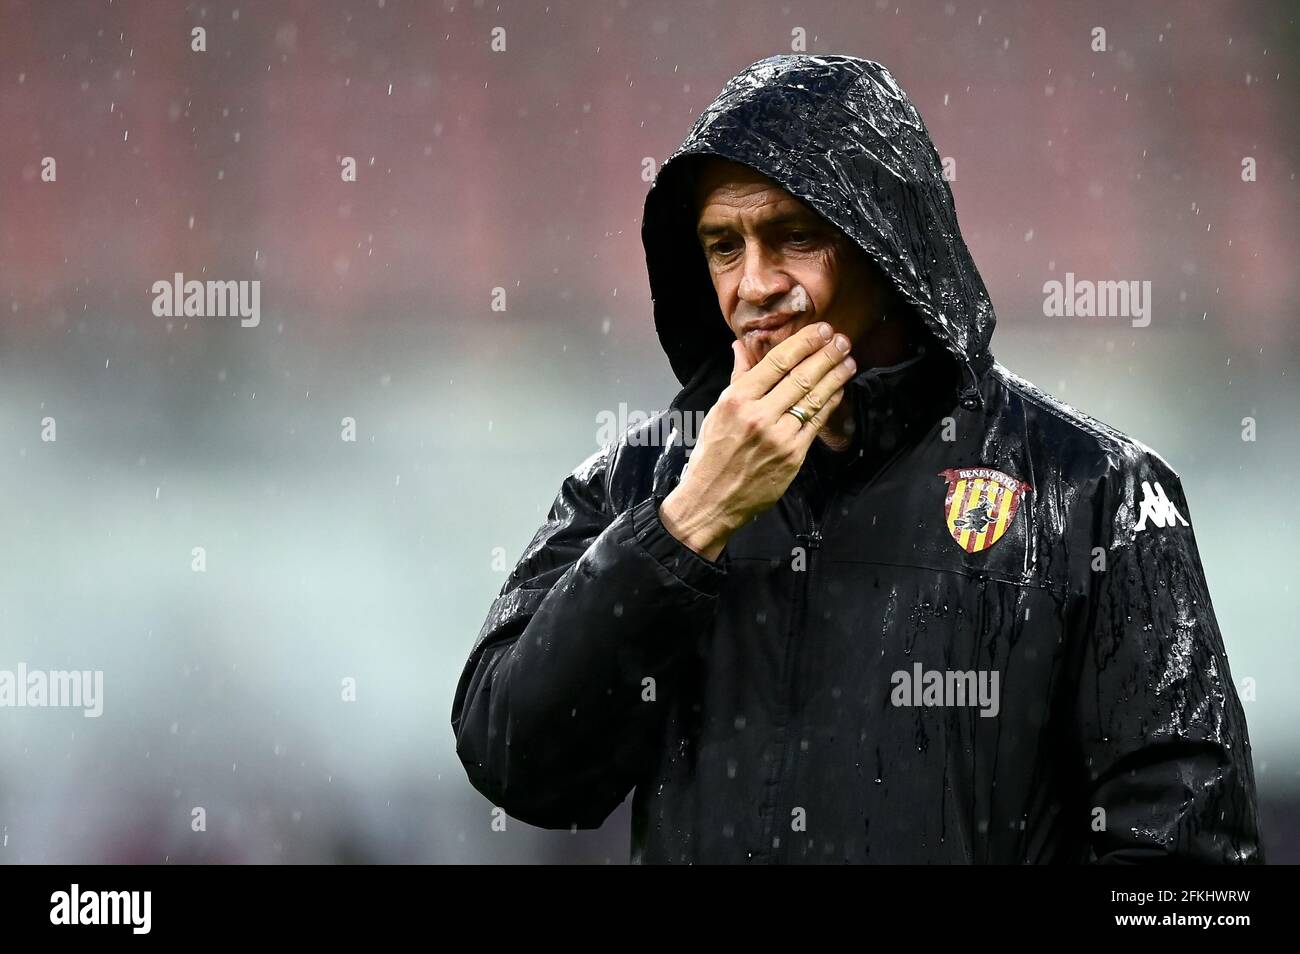 Milan, Italy. 01 May 2021. Filippo Inzaghi, head coach of Benevento Calcio, looks on prior to the Serie A football match between AC Milan and Benevento Calcio. AC Milan won 2-0 over Benevento Calcio. Credit: Nicolò Campo/Alamy Live News Stock Photo